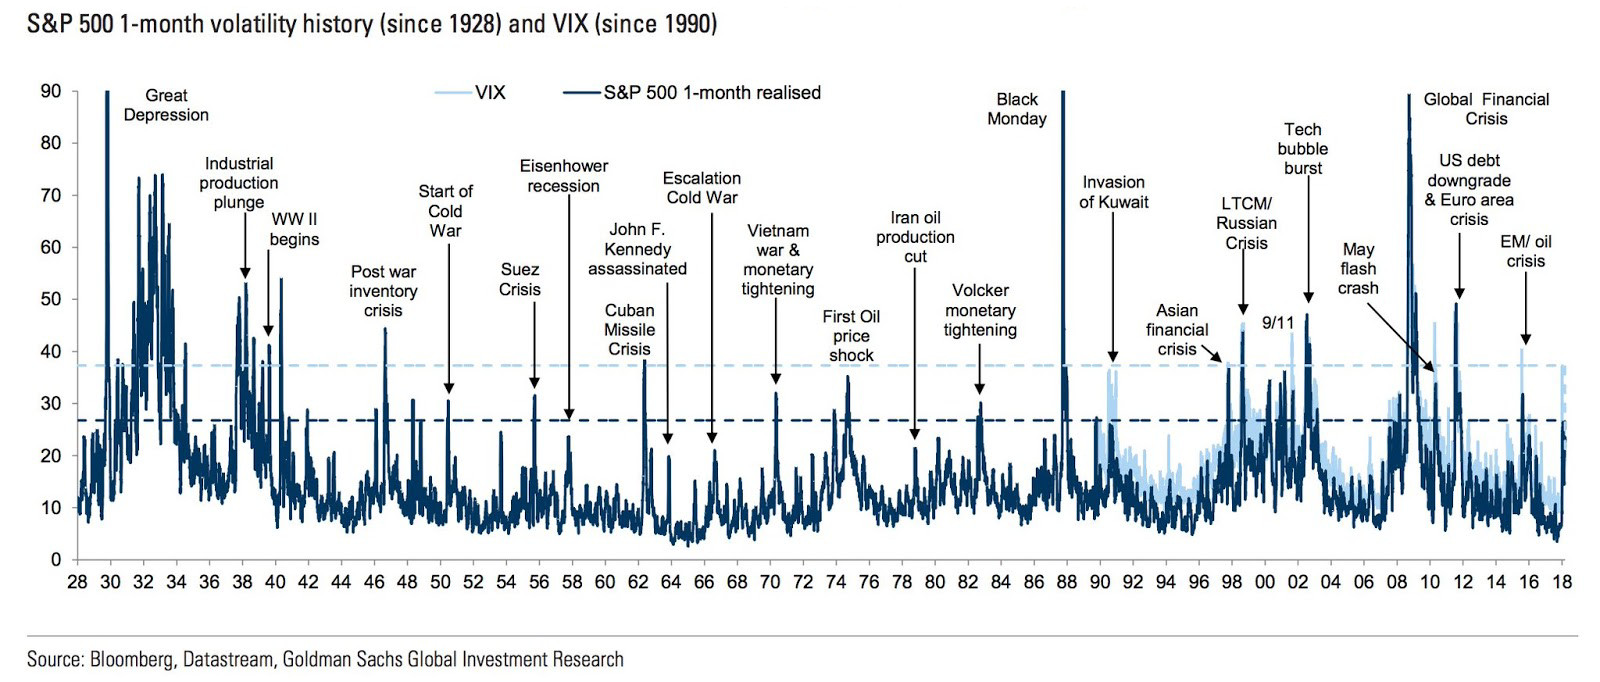 S&P 500 1-Month Volatility History Since 1928 and VIX Since ...